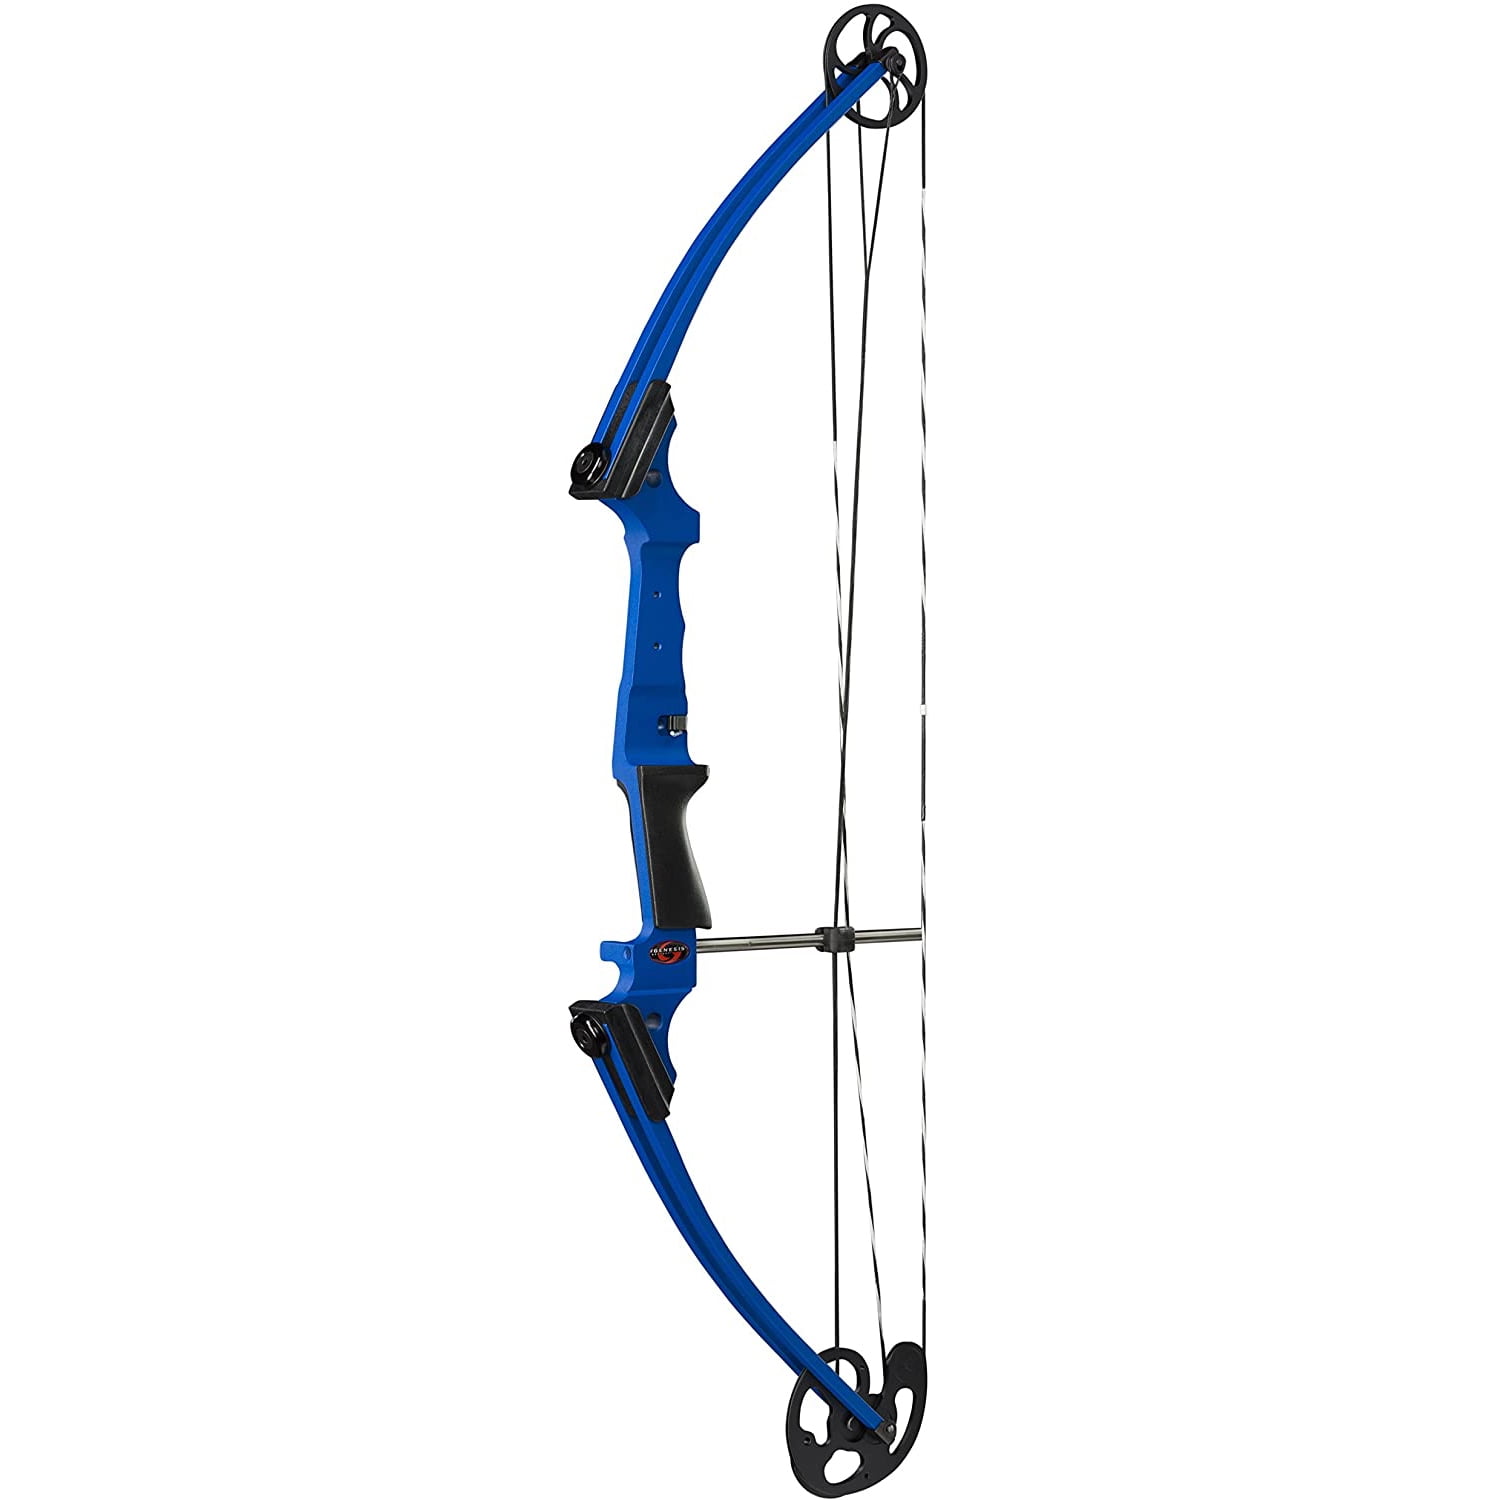 Daisy 964002-403 Youth Compound Bow Black 995880-623